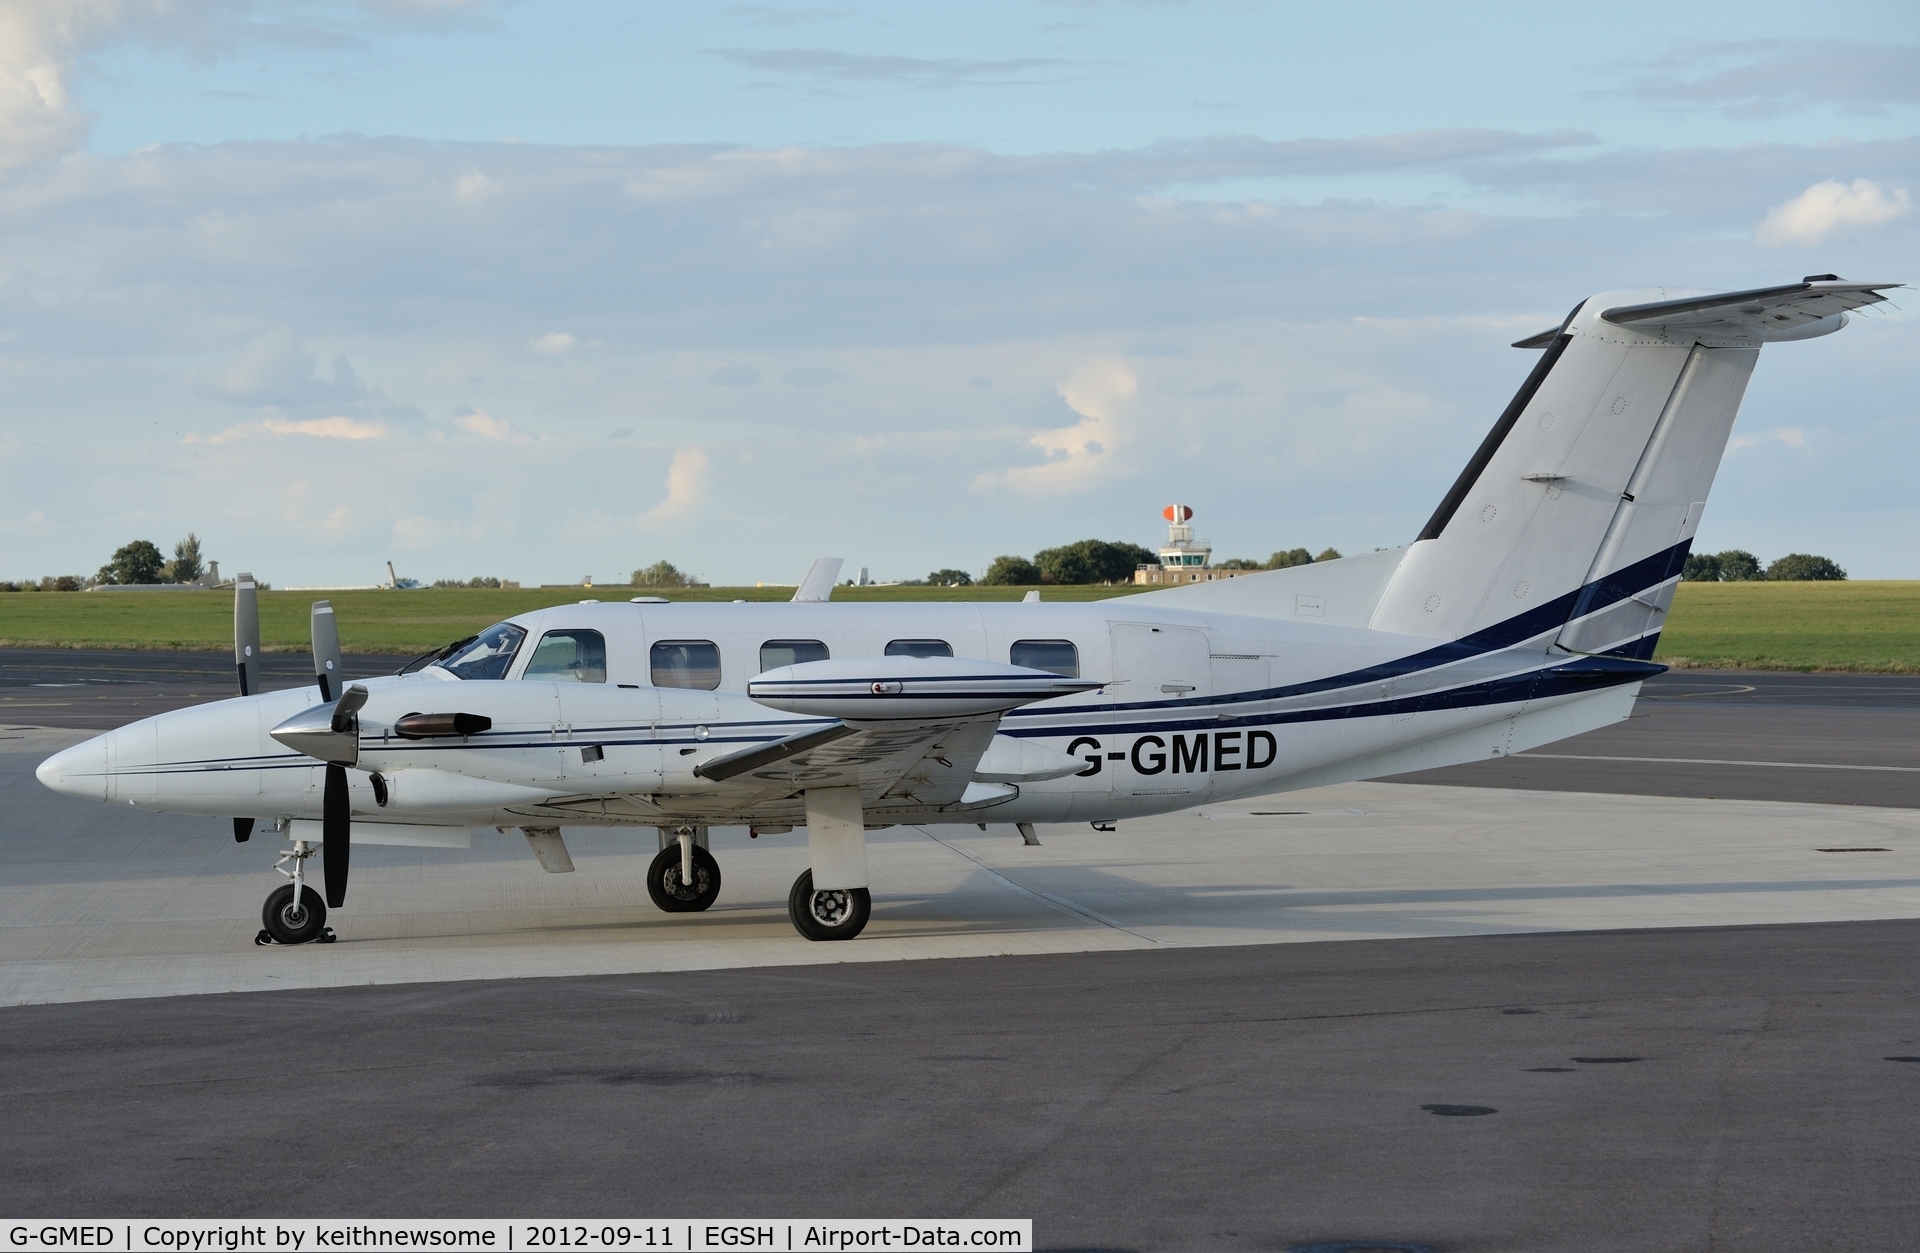 G-GMED, 1990 Piper PA-42-720 Cheyenne III C/N 42-5501050, Third medivac within two days !!